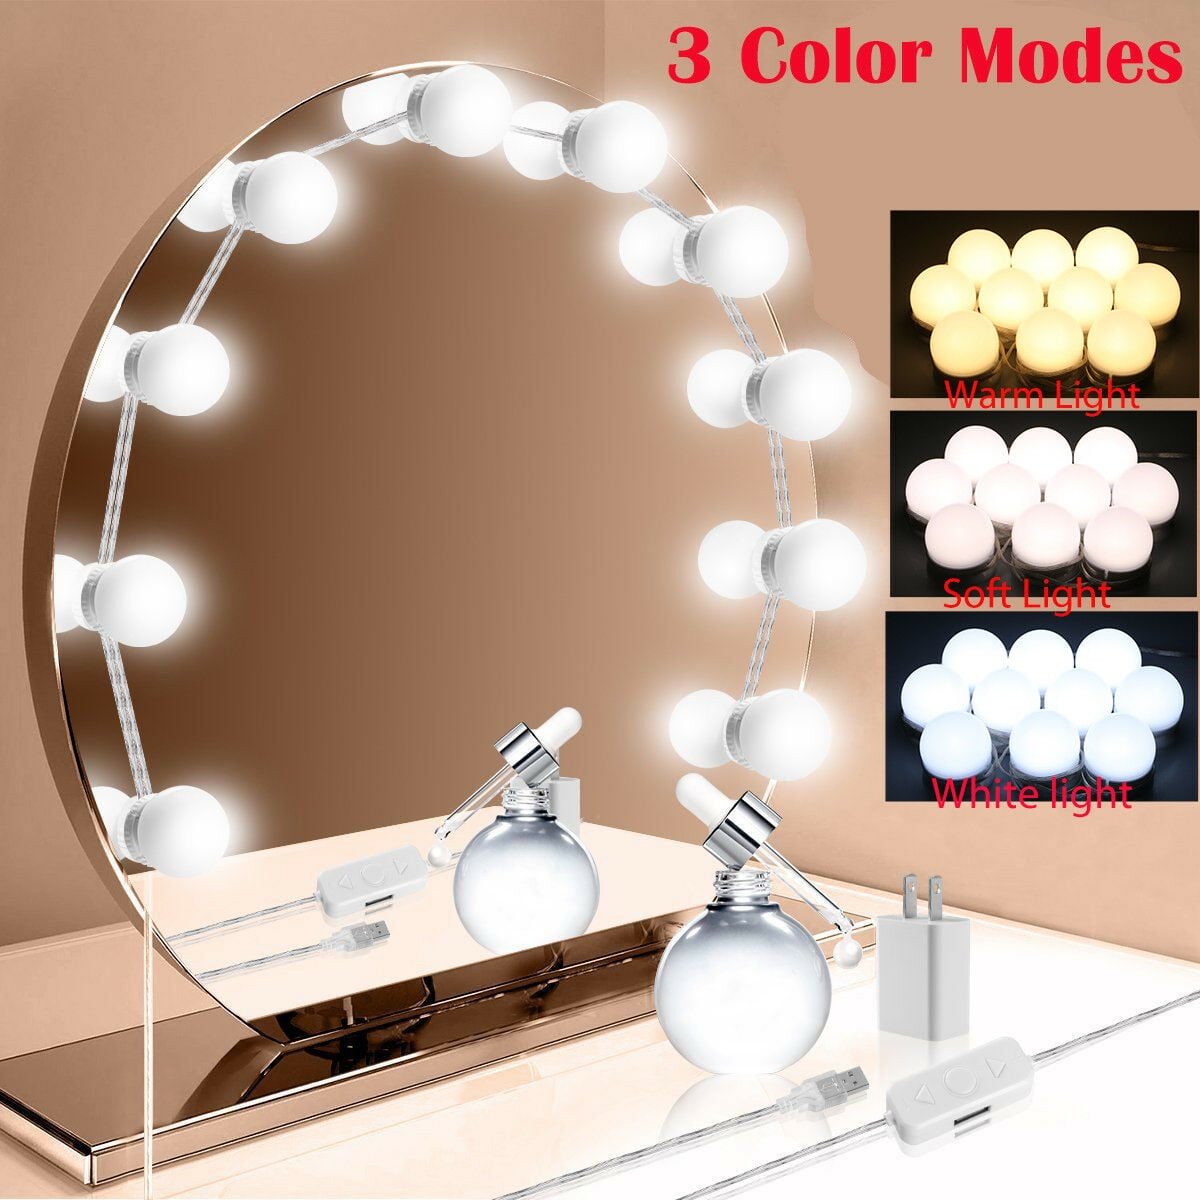 Plug in Dimmable Brightness 3 Color Modes Vanity Lights for Mirror 10 LED Bulbs Hollywood Makeup Lights Stick up for Dressing Table Bathroom Body Wall Mirror Lights 